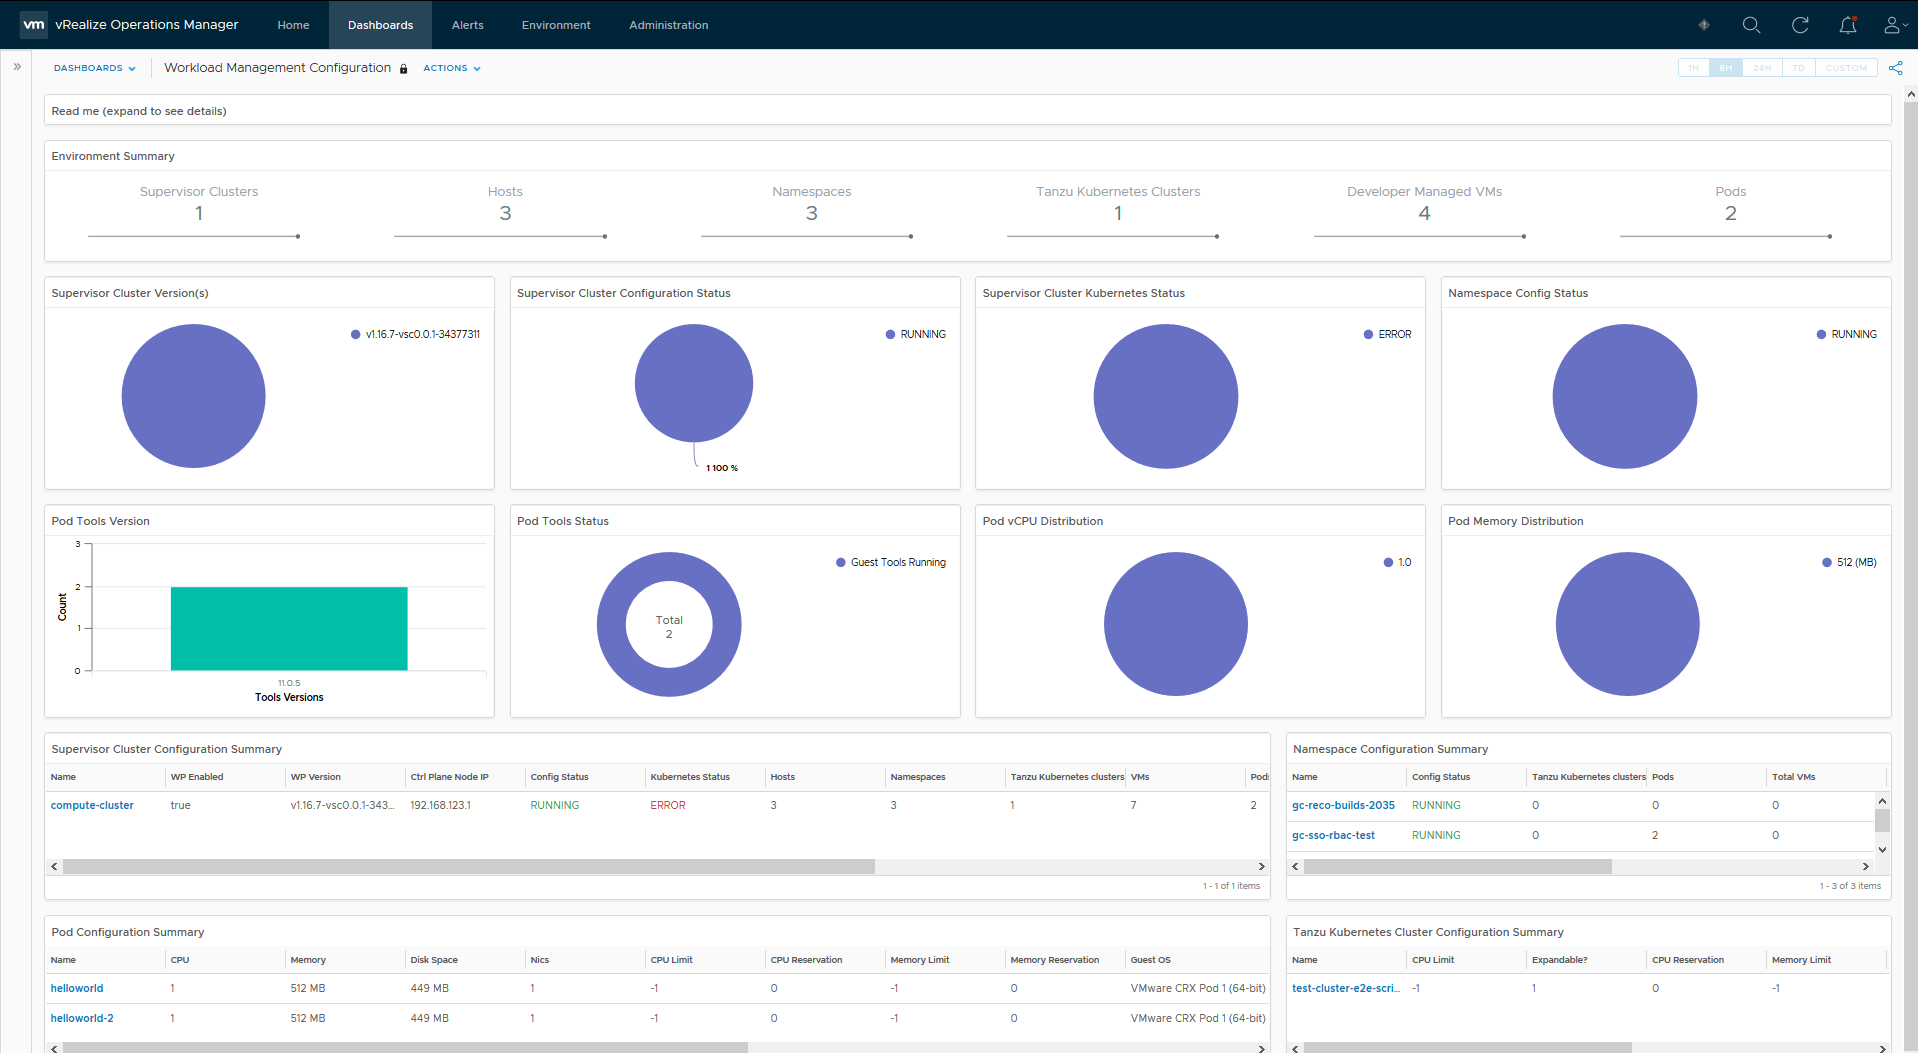 The new Workload Management Configuration dashboard in vRealize Operation s8.1